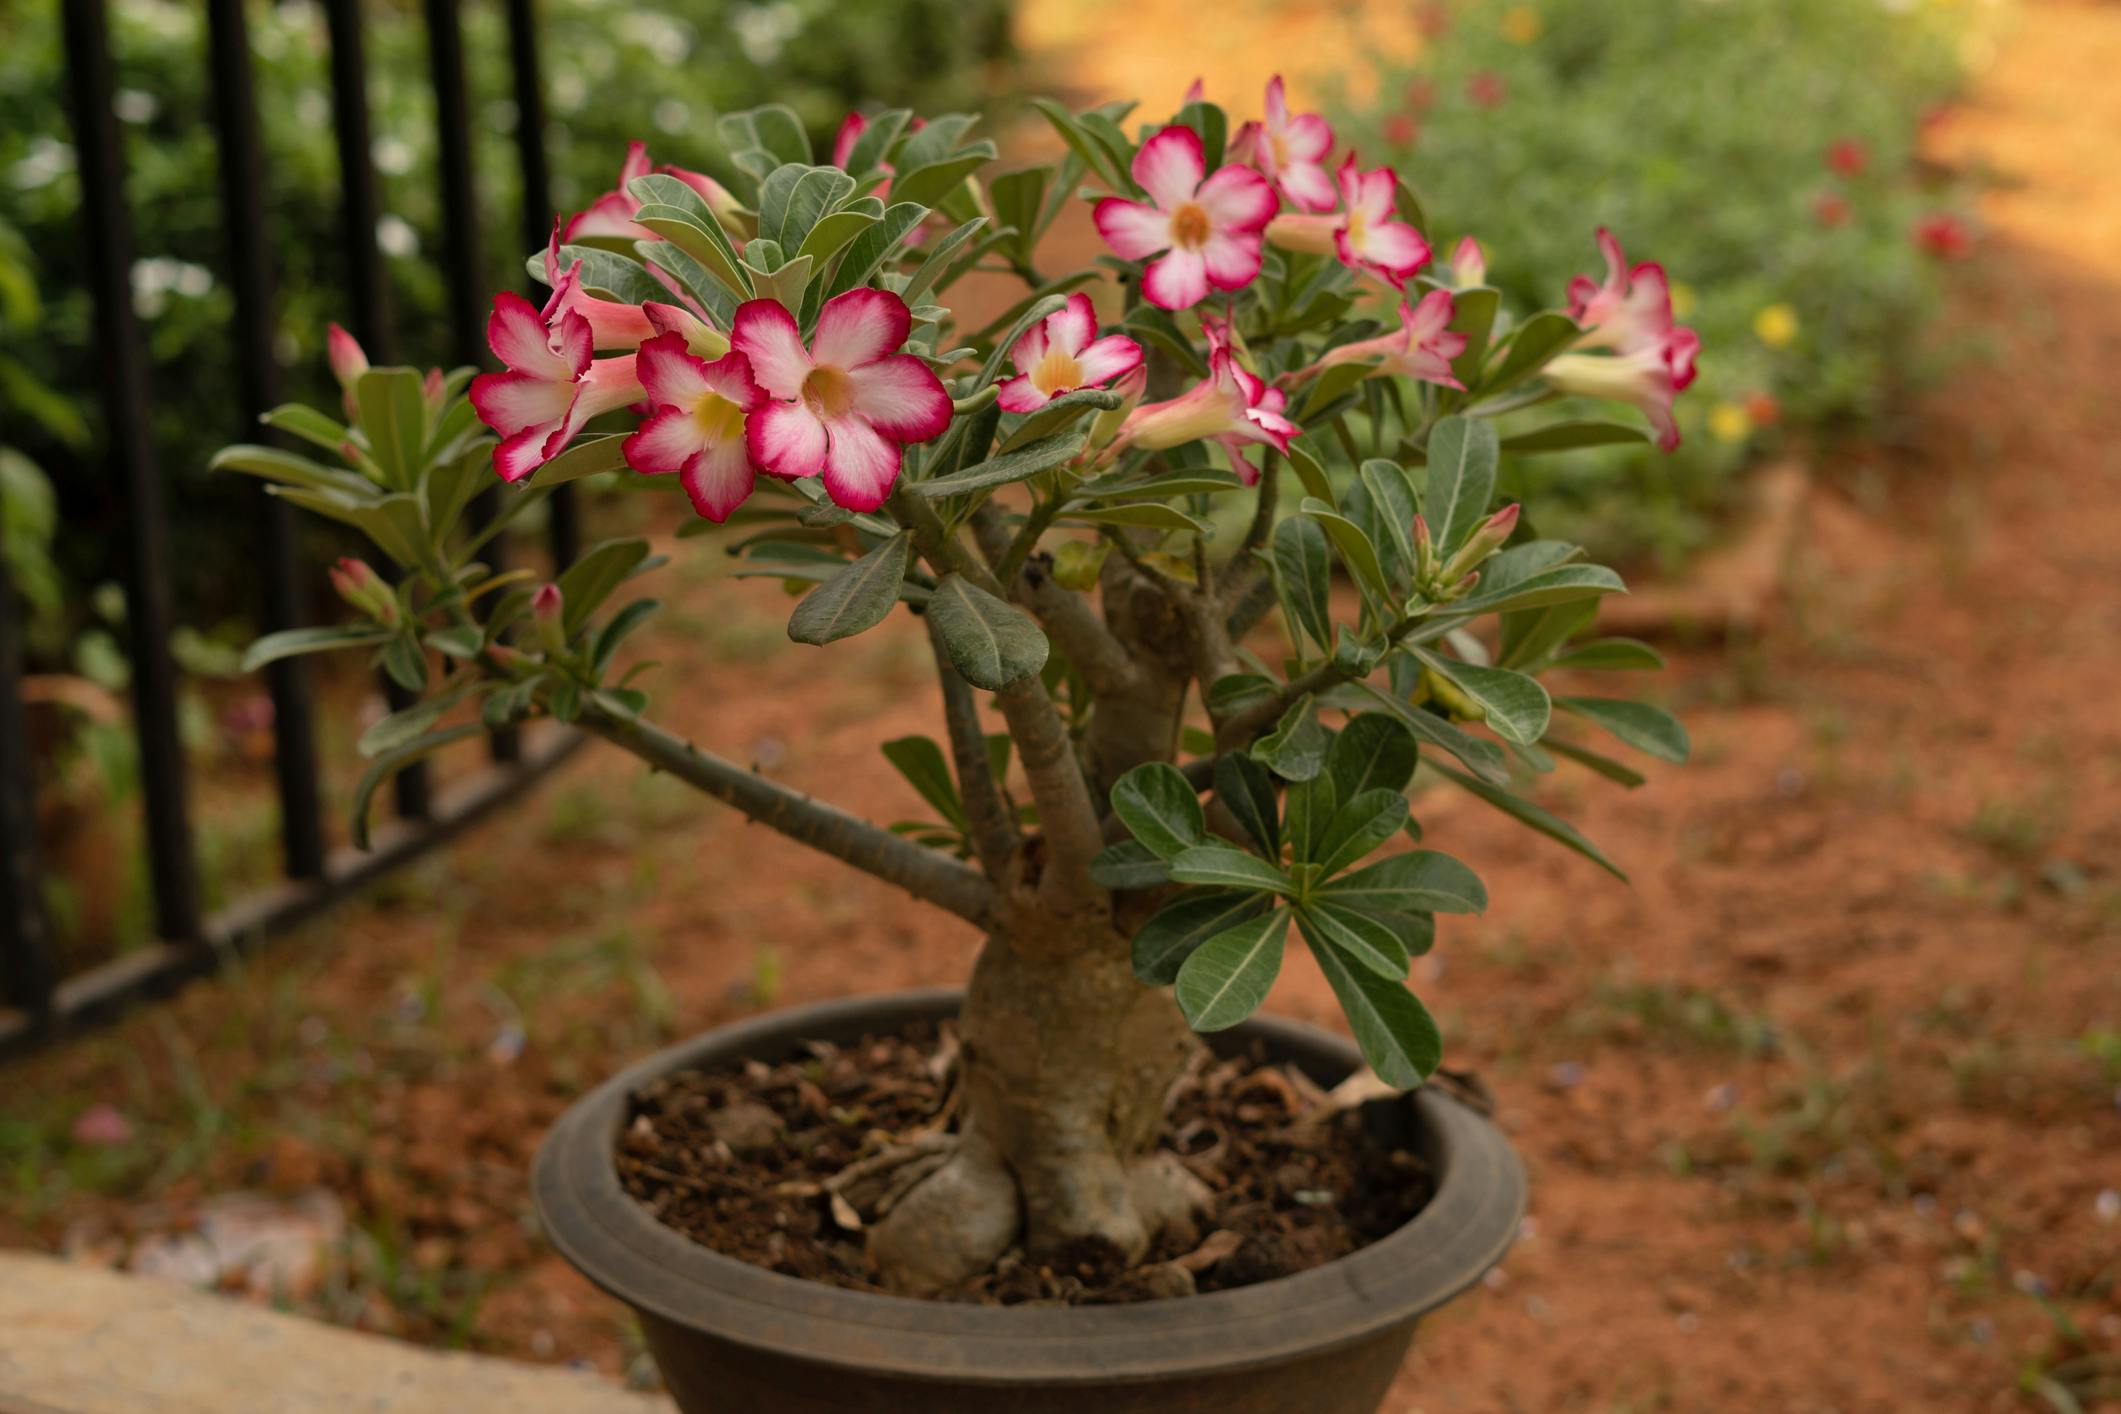 Desert Rose with white and pink blooms in outdoor garden pot.